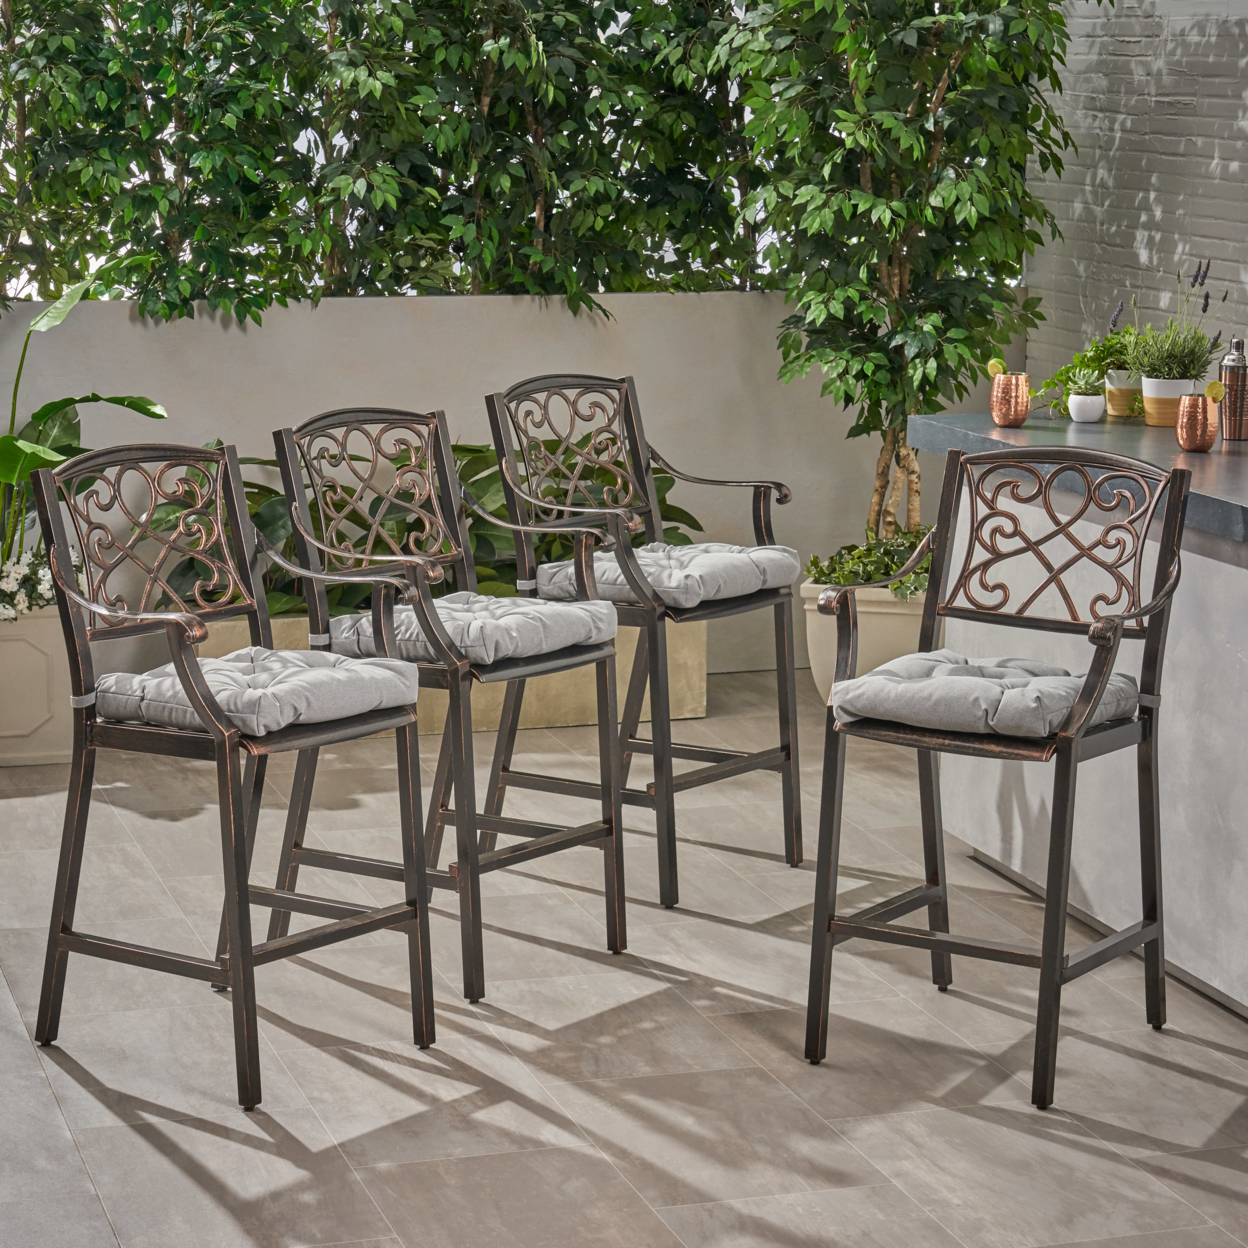 Deirdre Outdoor Barstool With Cushion (Set Of 4) - Shiny Copper + Charcoal